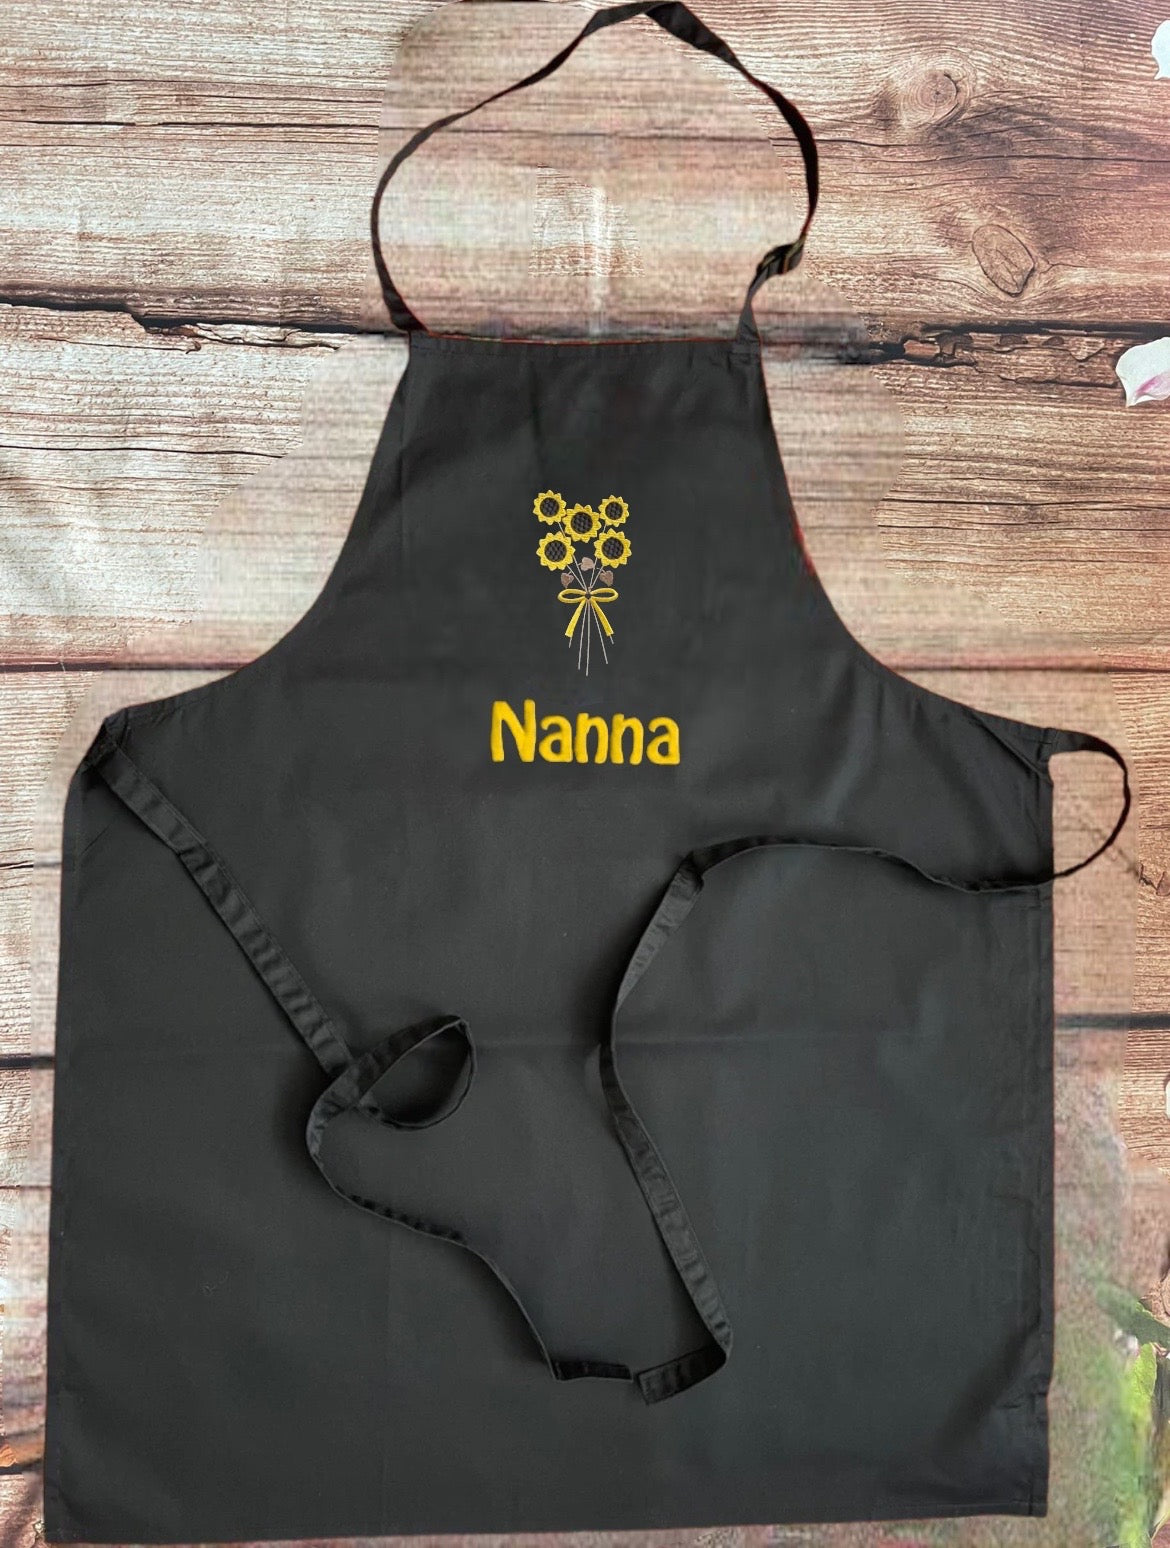 Mother's Day Apron personalised with embroidered name and choice of flower bouquet - ideal gift for Mummy, Nanny, Grandma, Mom